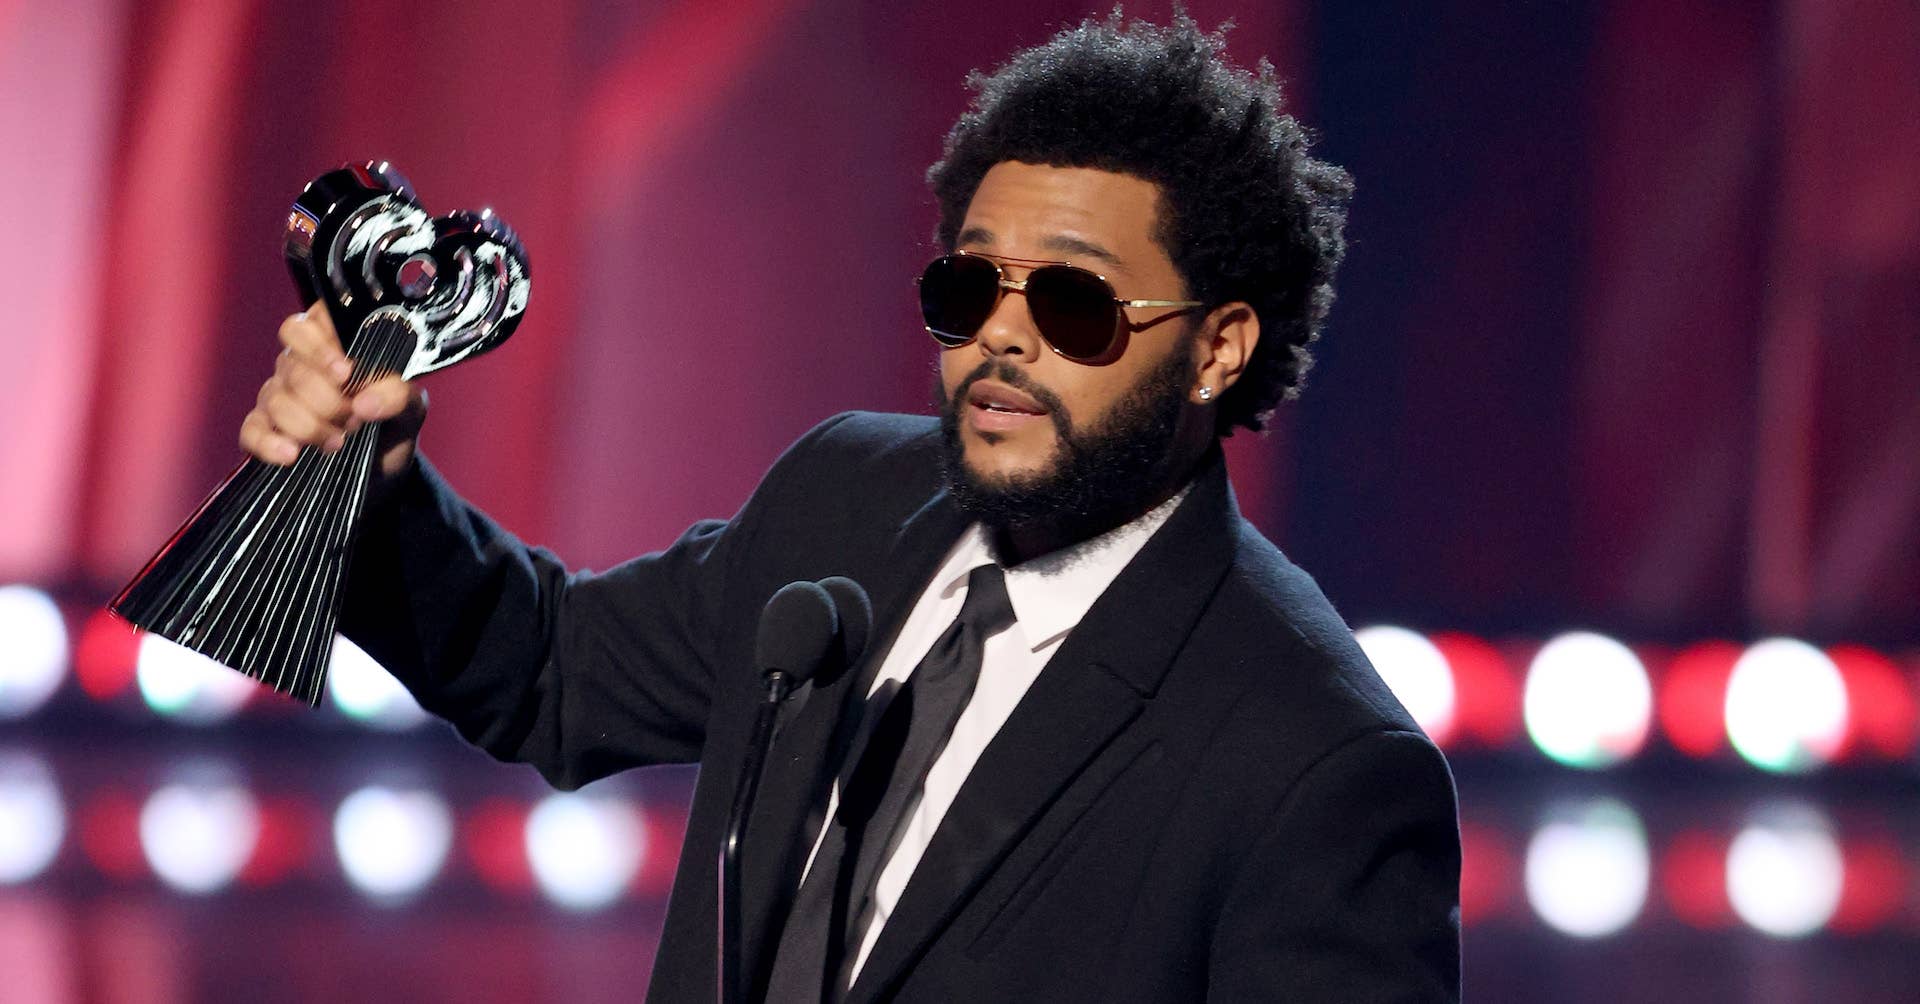 The Weeknd accepting an award at iHeartRadioMusic awards